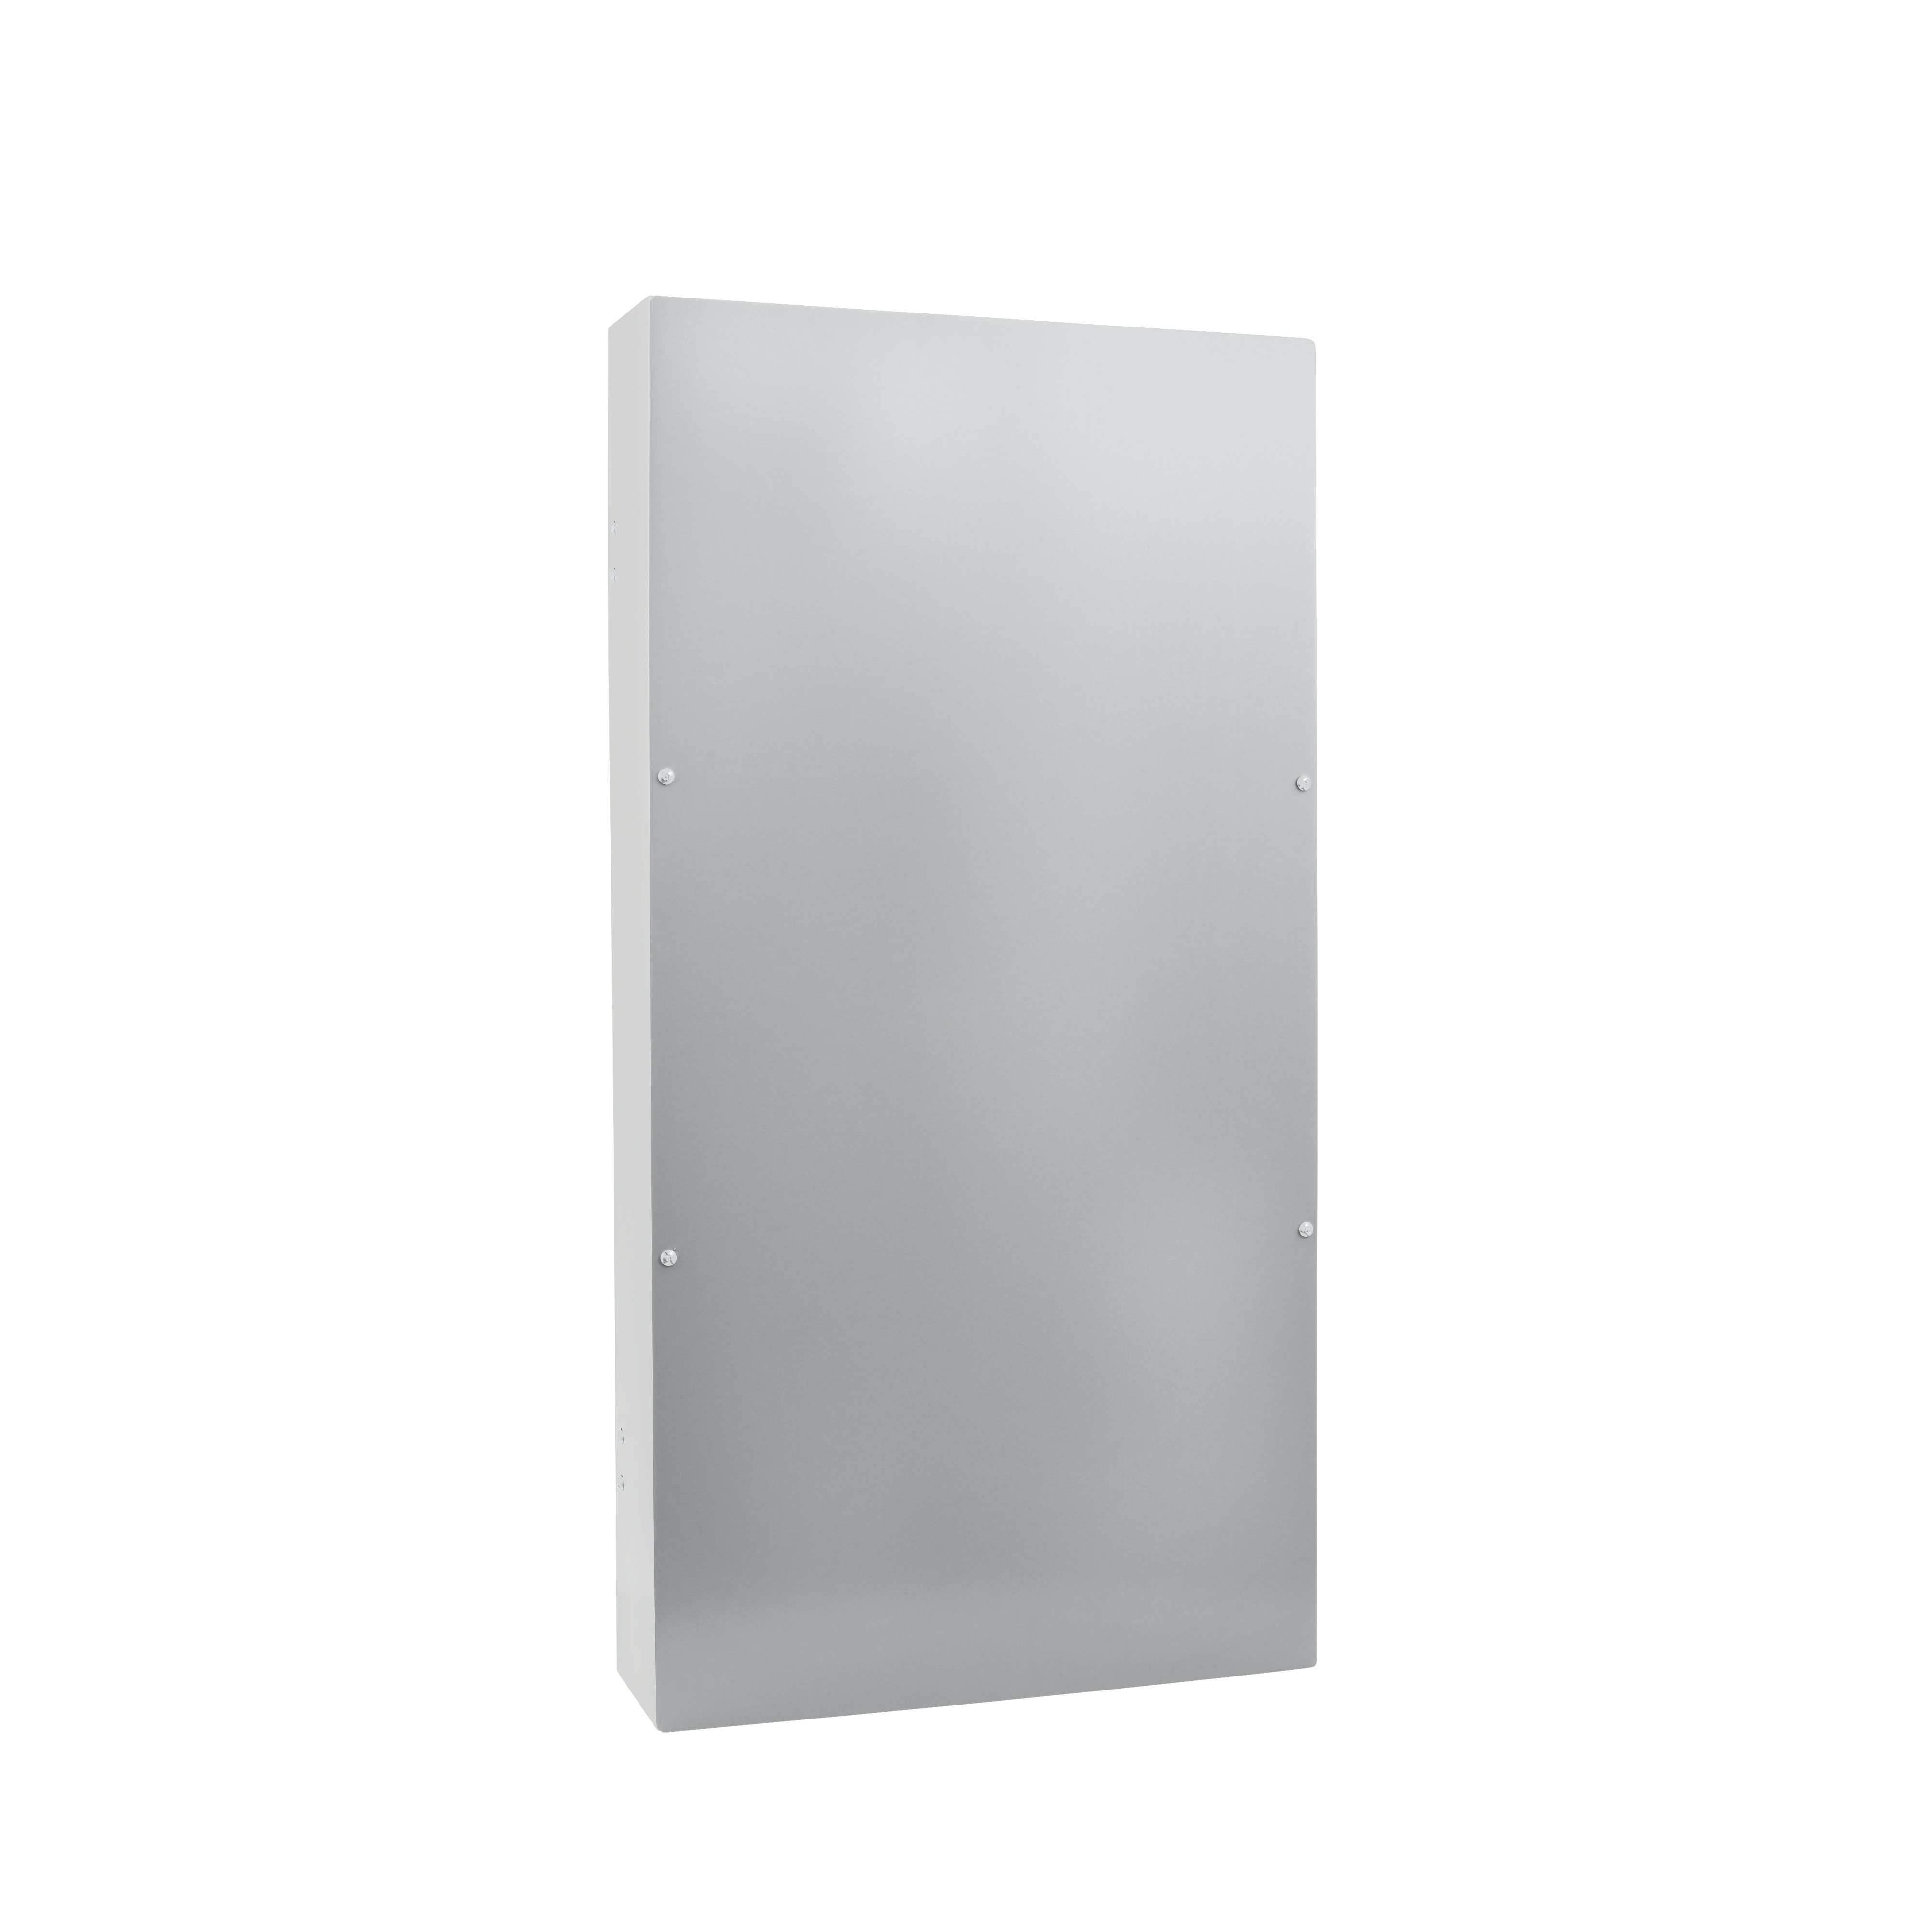 Enclosure Panel Skirt Assembly, NQNF, Type 1, 20x58x5.75in